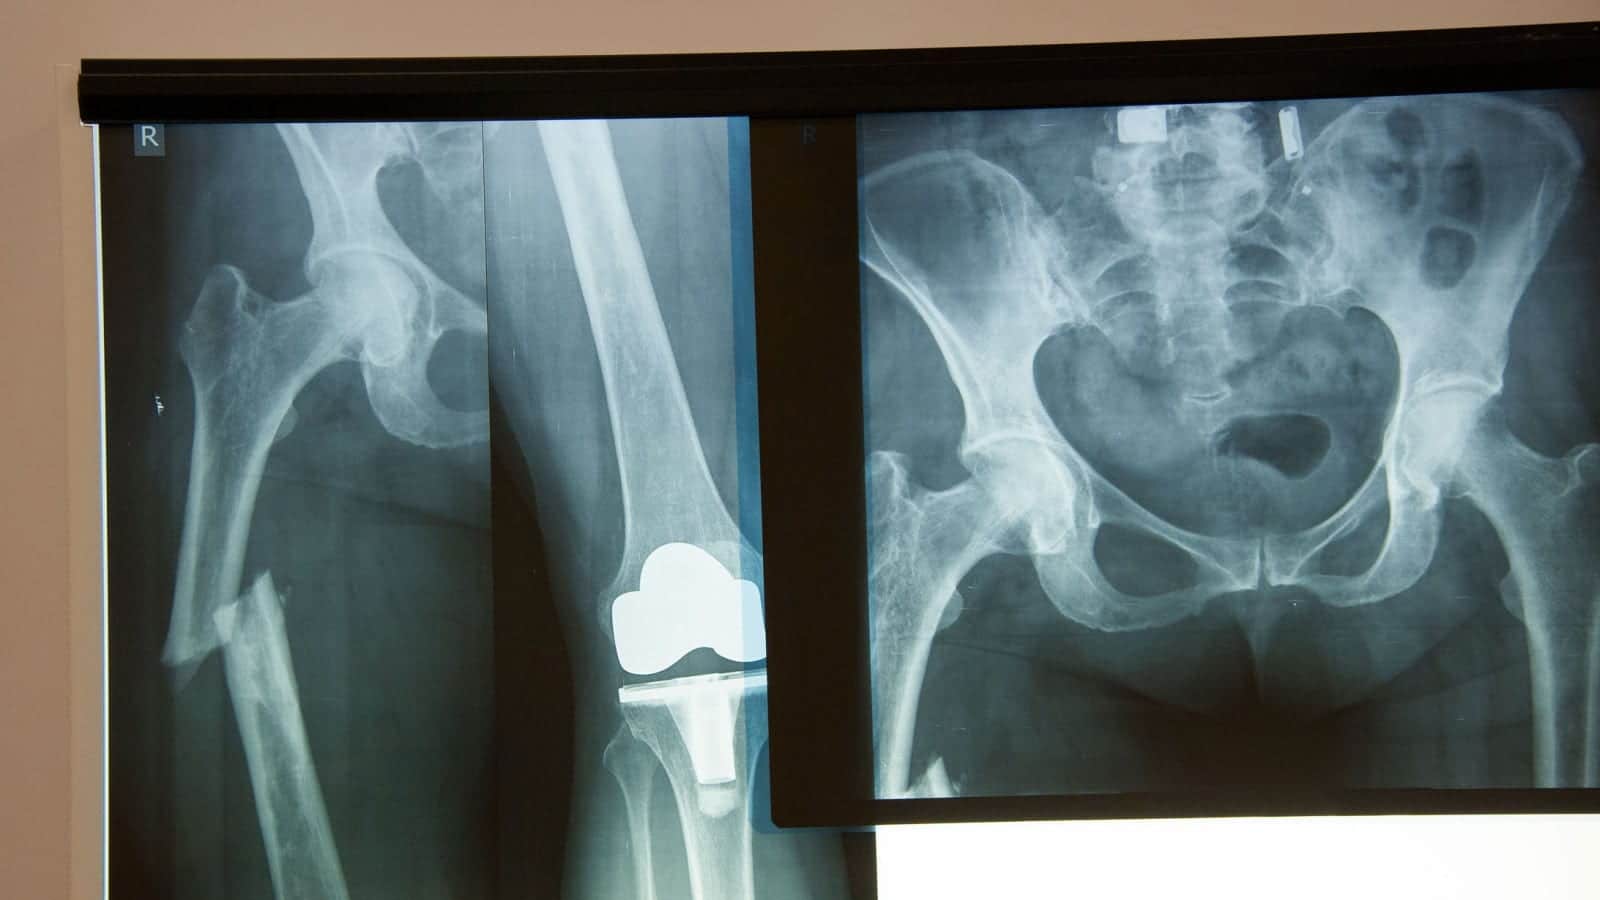 Knee & Hip Replacement Lawsuits